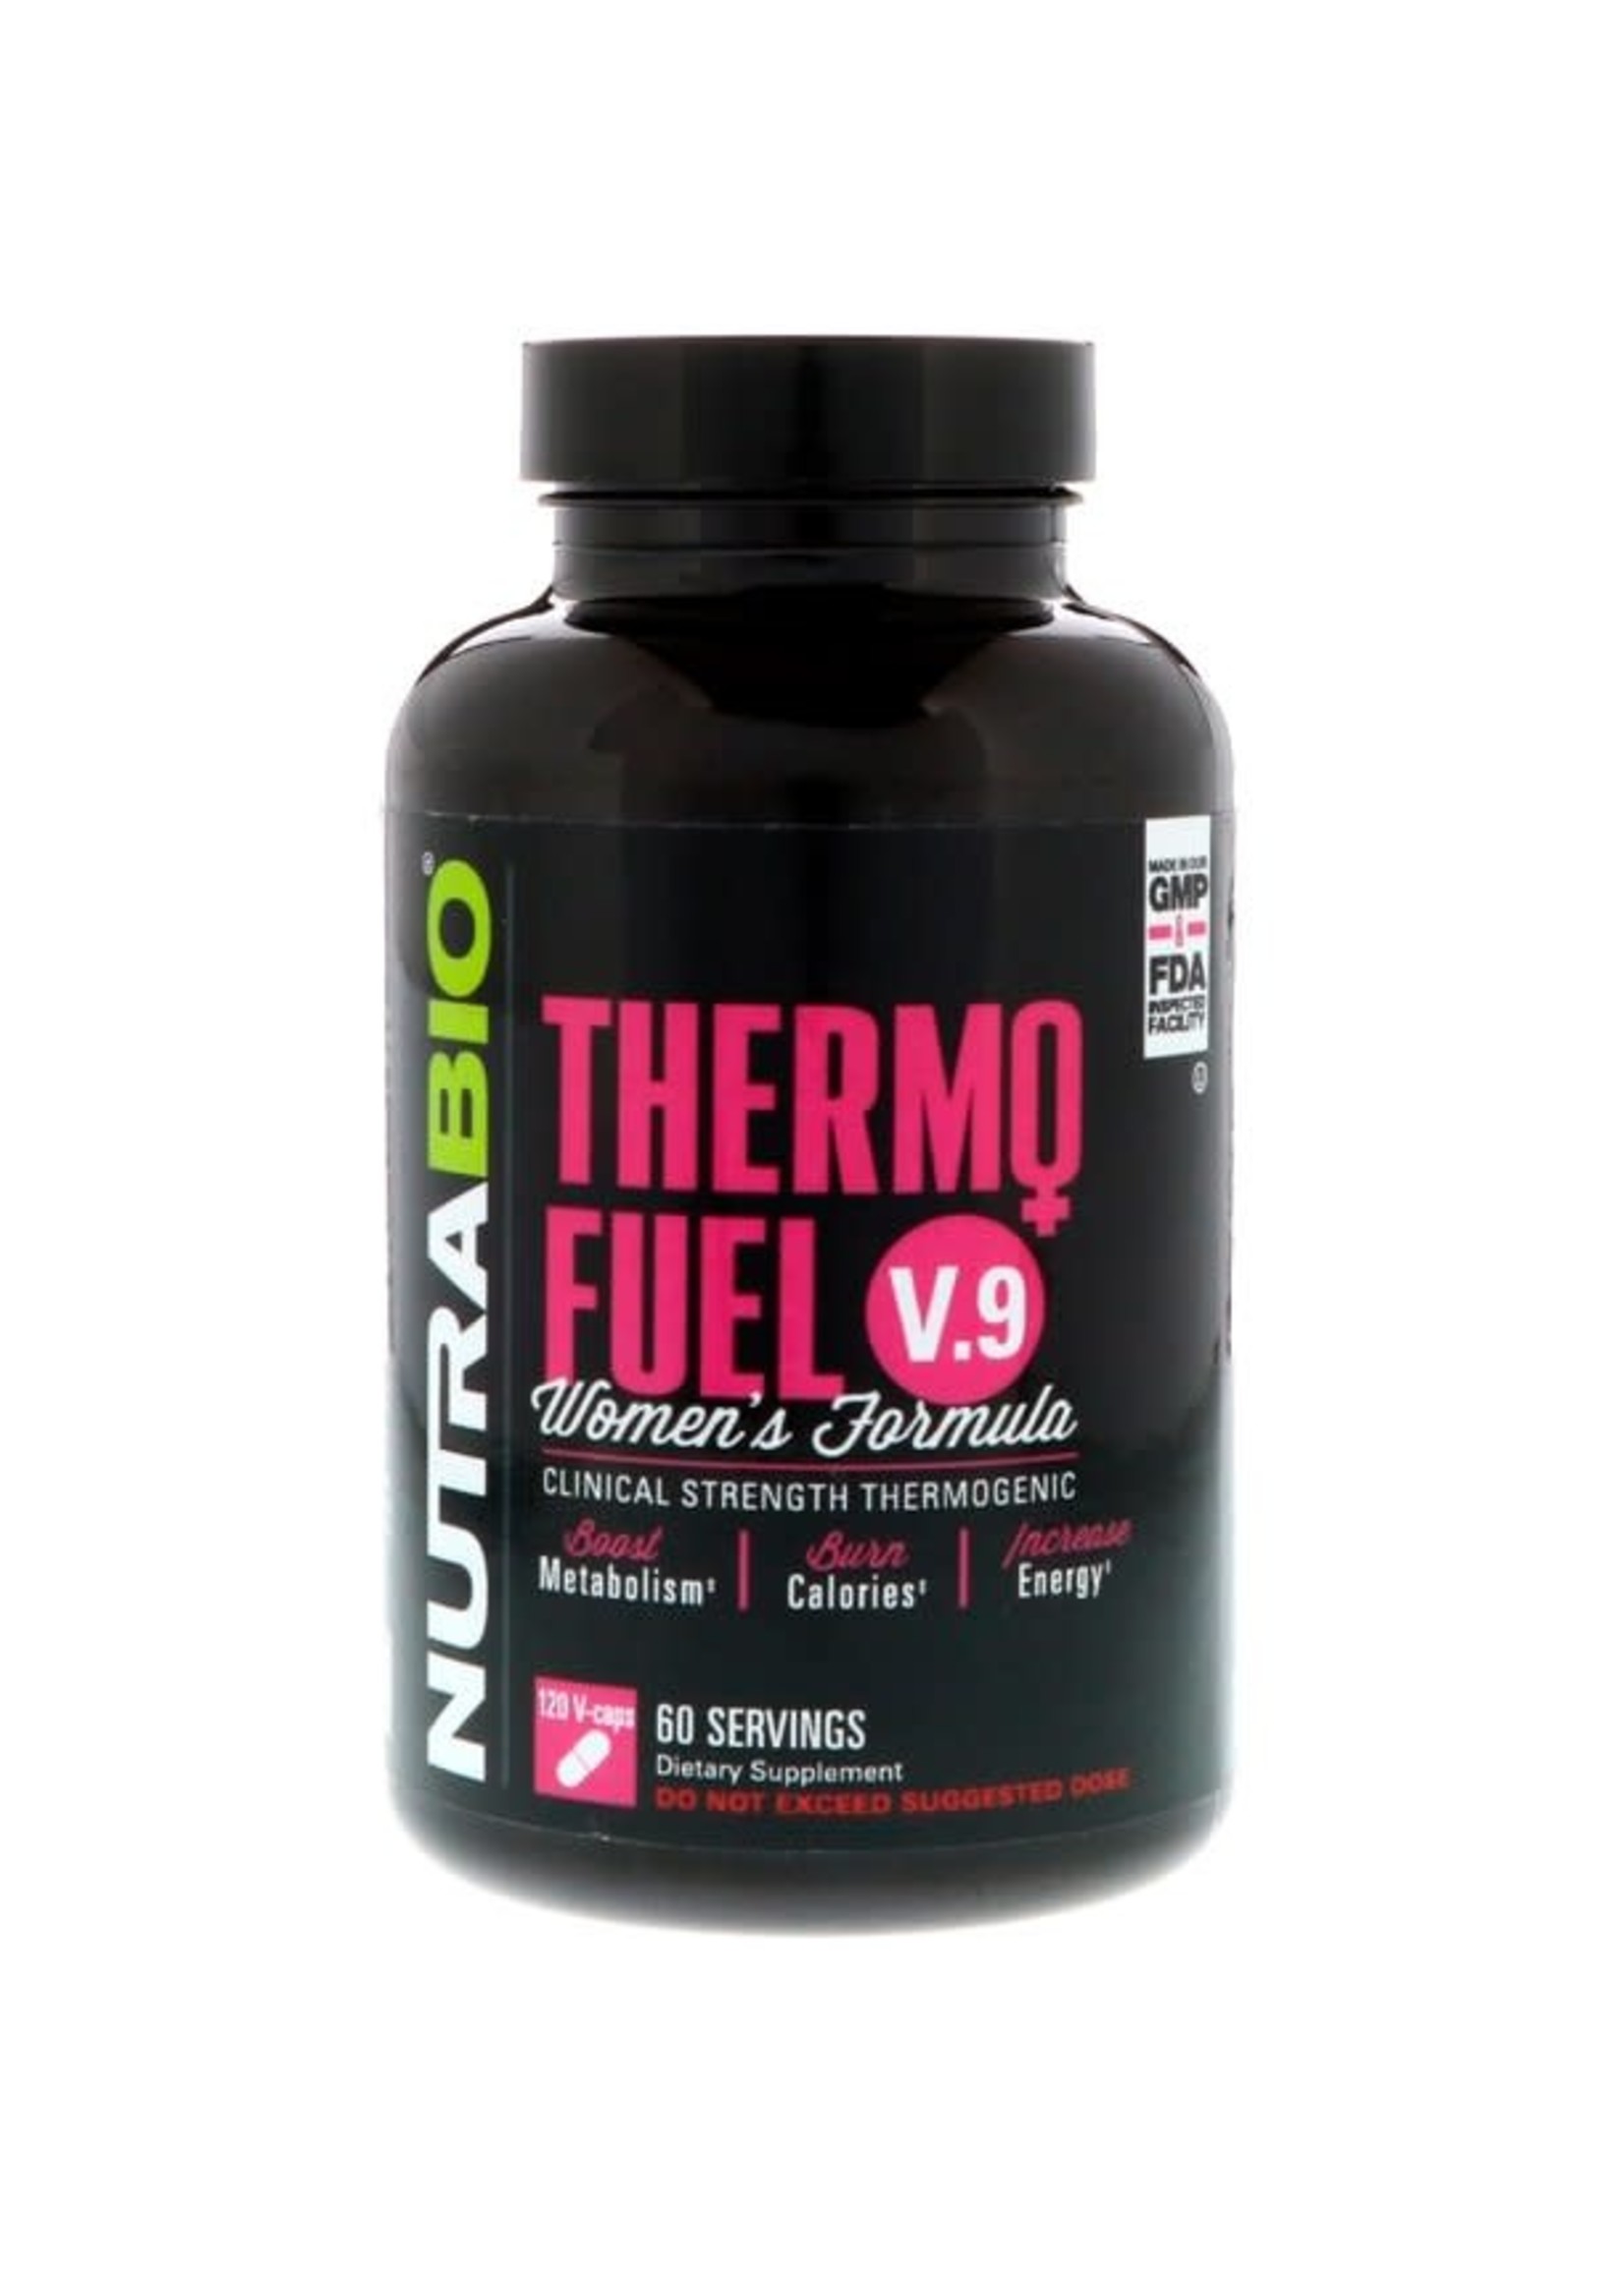 Nutra Bio Thermo Fuel V.9 for Women